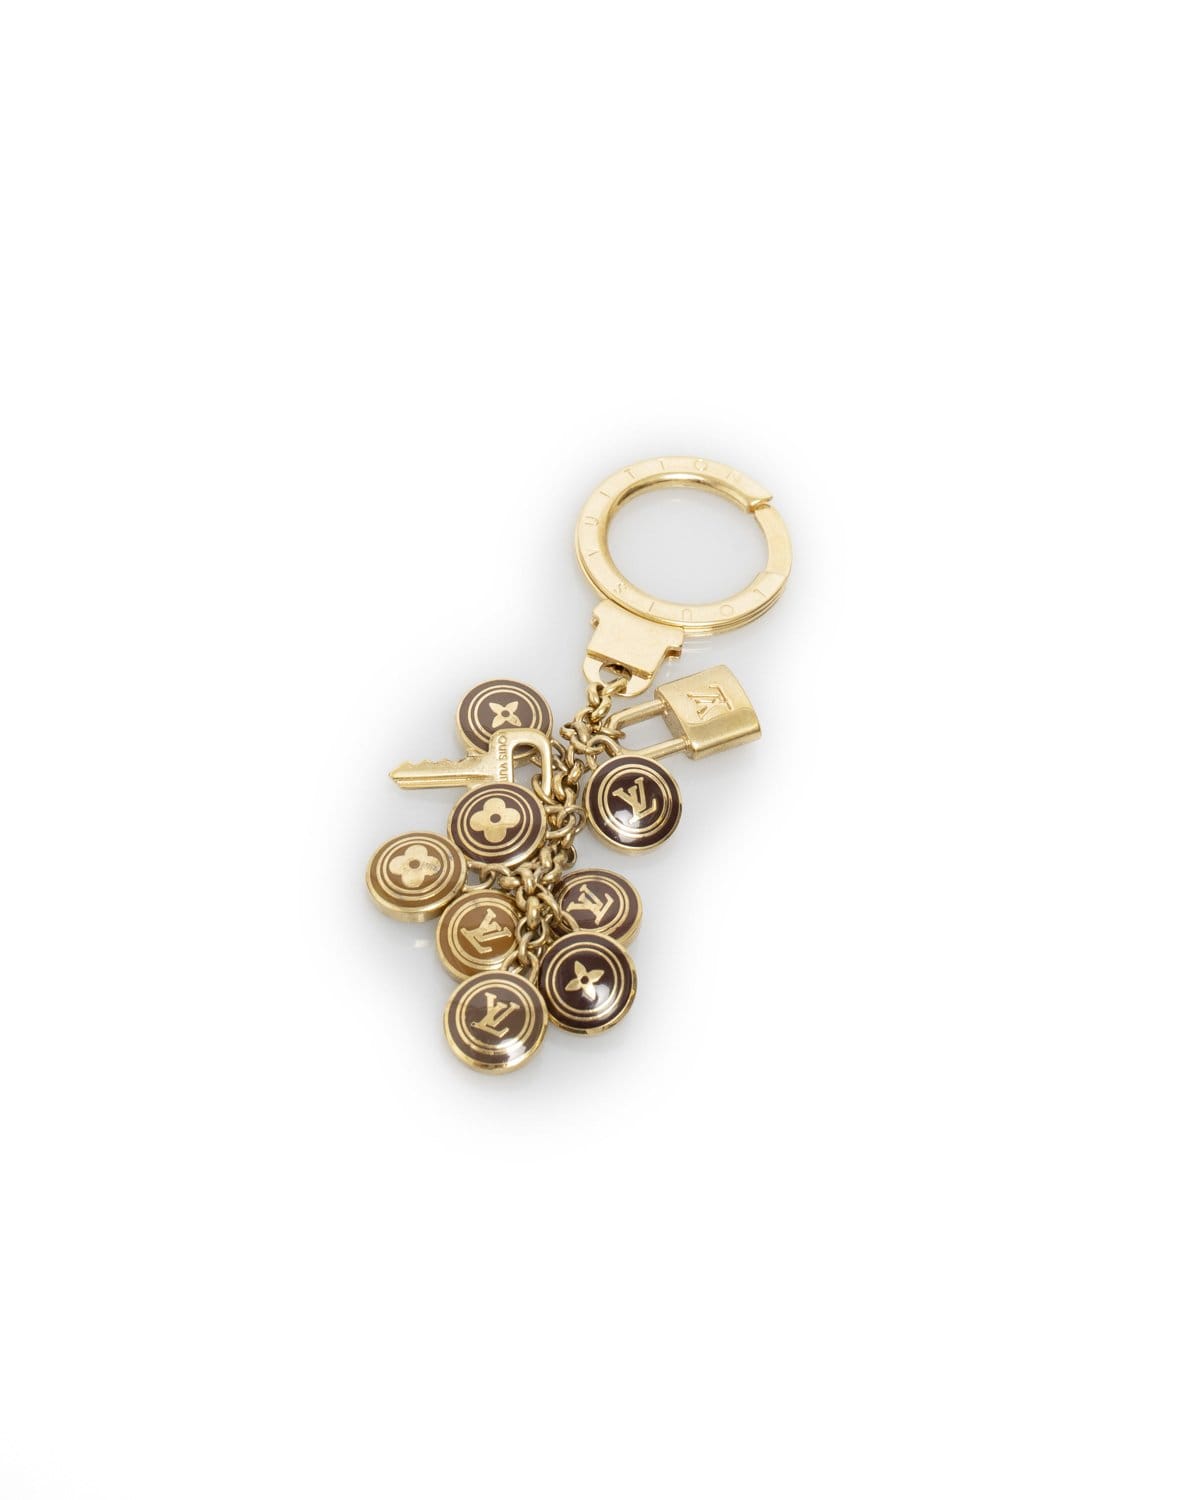 LuxuryPromise Louis Vuitton Mini Disc and Padlock and Key Bag Charm and Key Holder - AWL1758